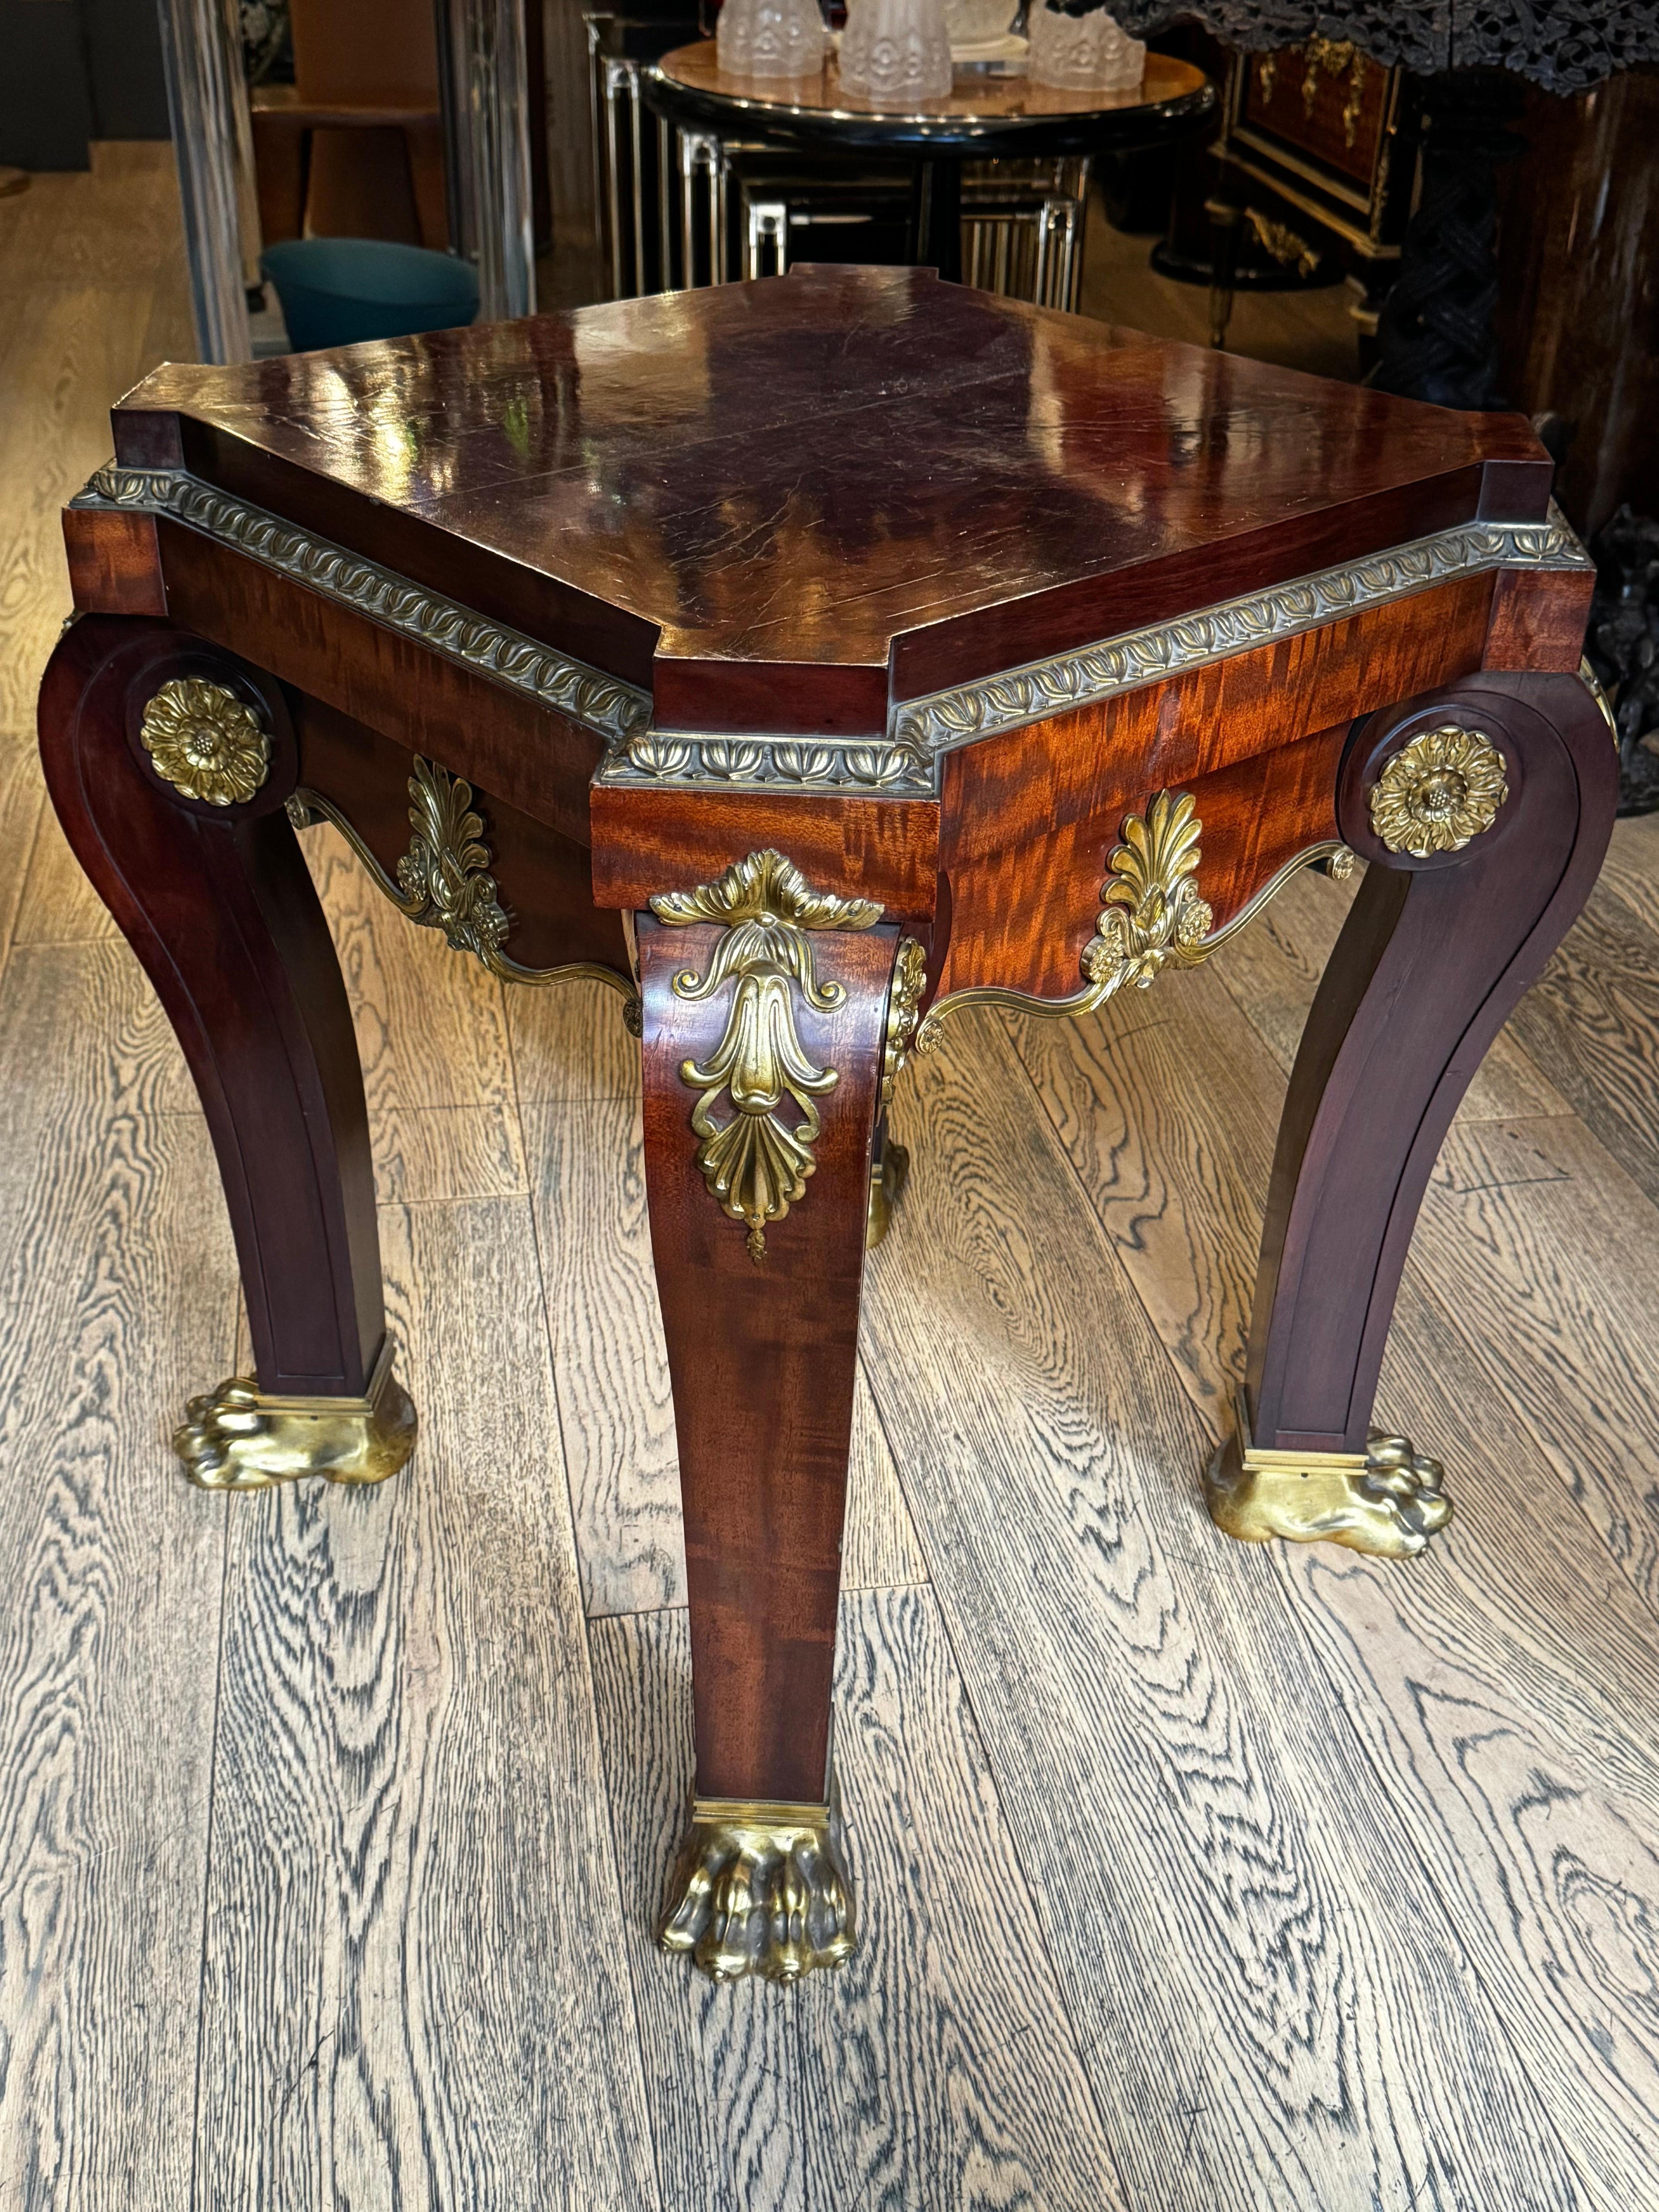 This exquisite French Empire table, masterfully crafted from the finest mahogany and adorned with ornate bronze detailing, is a quintessential representation of the opulence and precision that defined early 19th-century craftsmanship. The table's